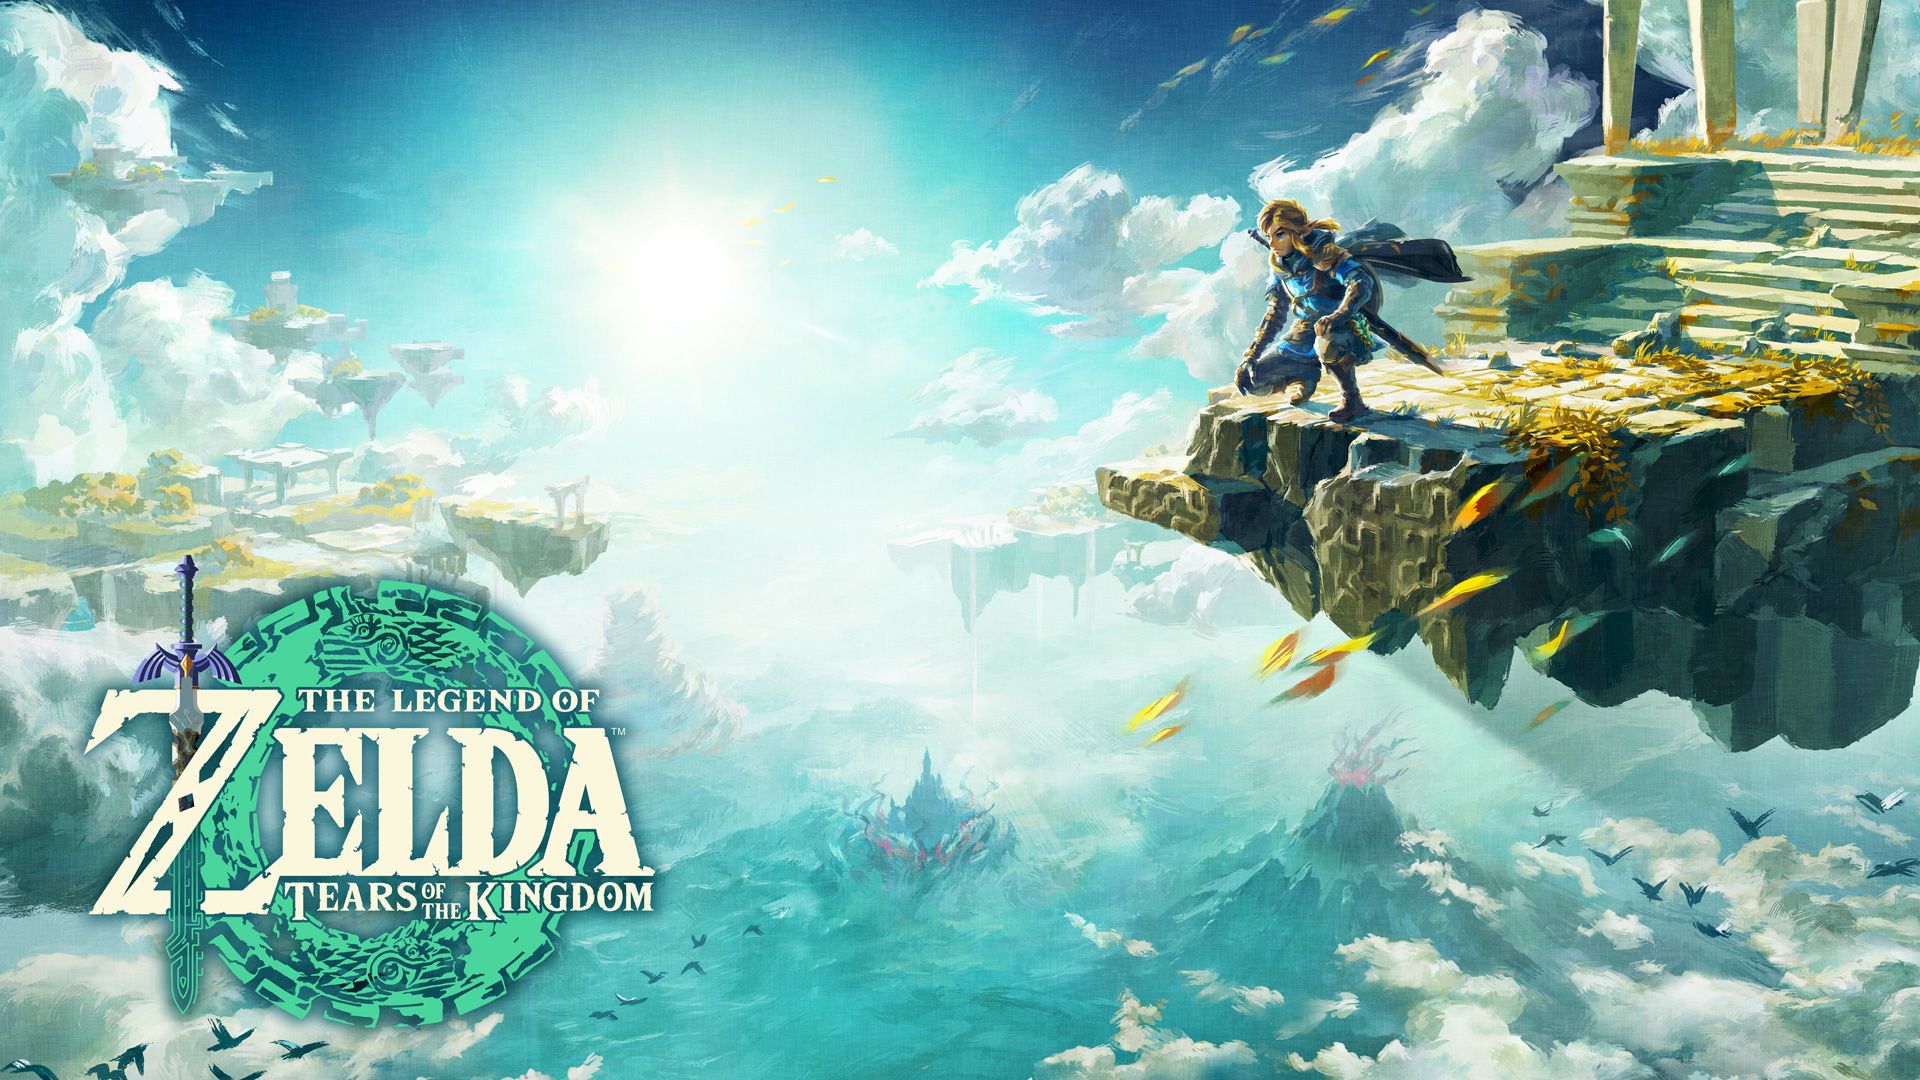 Breath of the Wild 2 is officially The Legend of Zelda: Tears of the Kingdom and will be out in May 2023